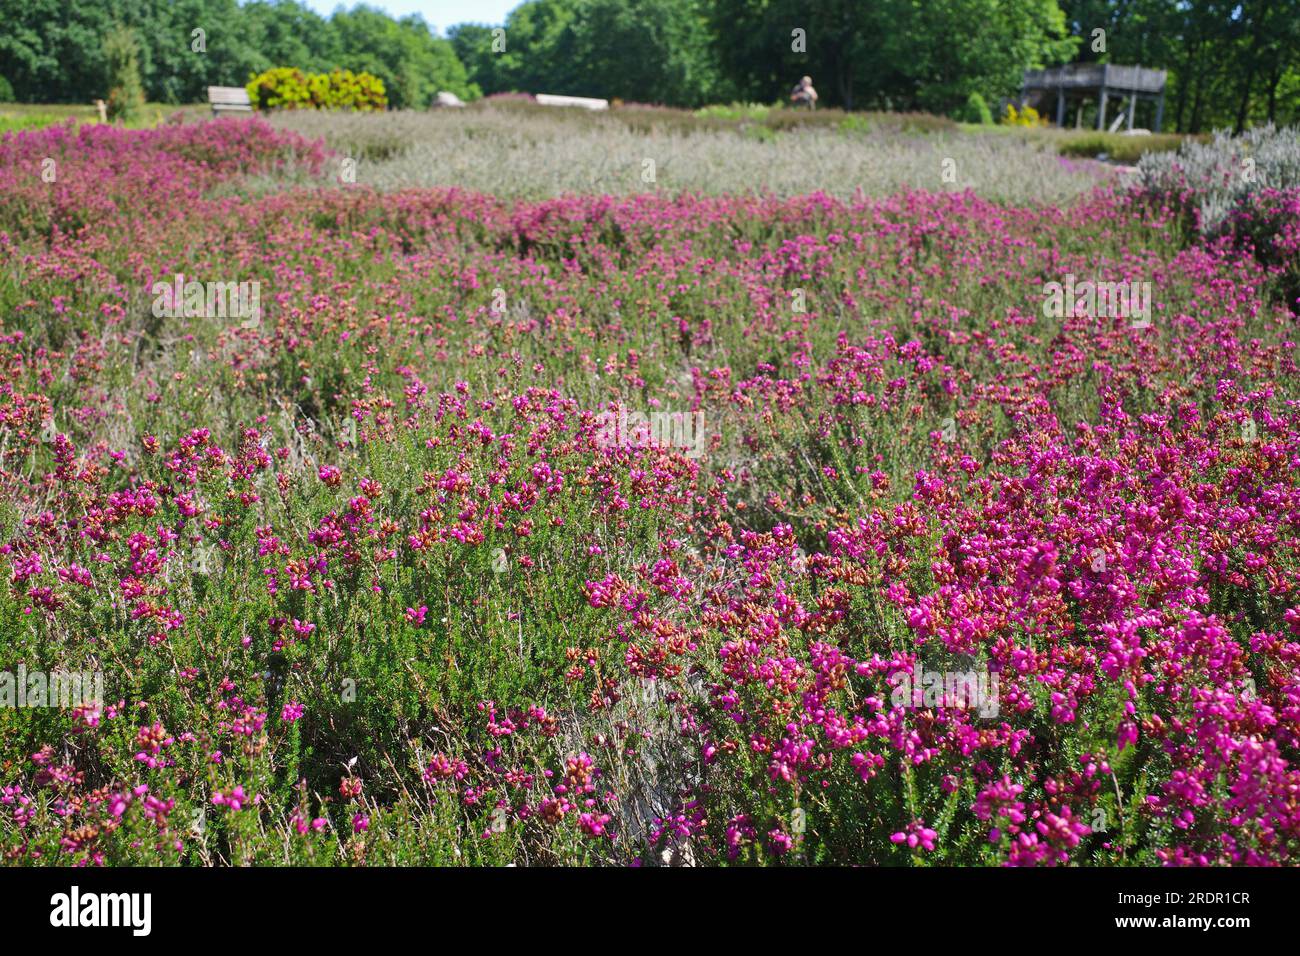 In the heather garden in Schneverdingen, Germany, heather is in bloom almost every month of the year. Even in July! In front is Erica cinerea Rote Ros Stock Photo